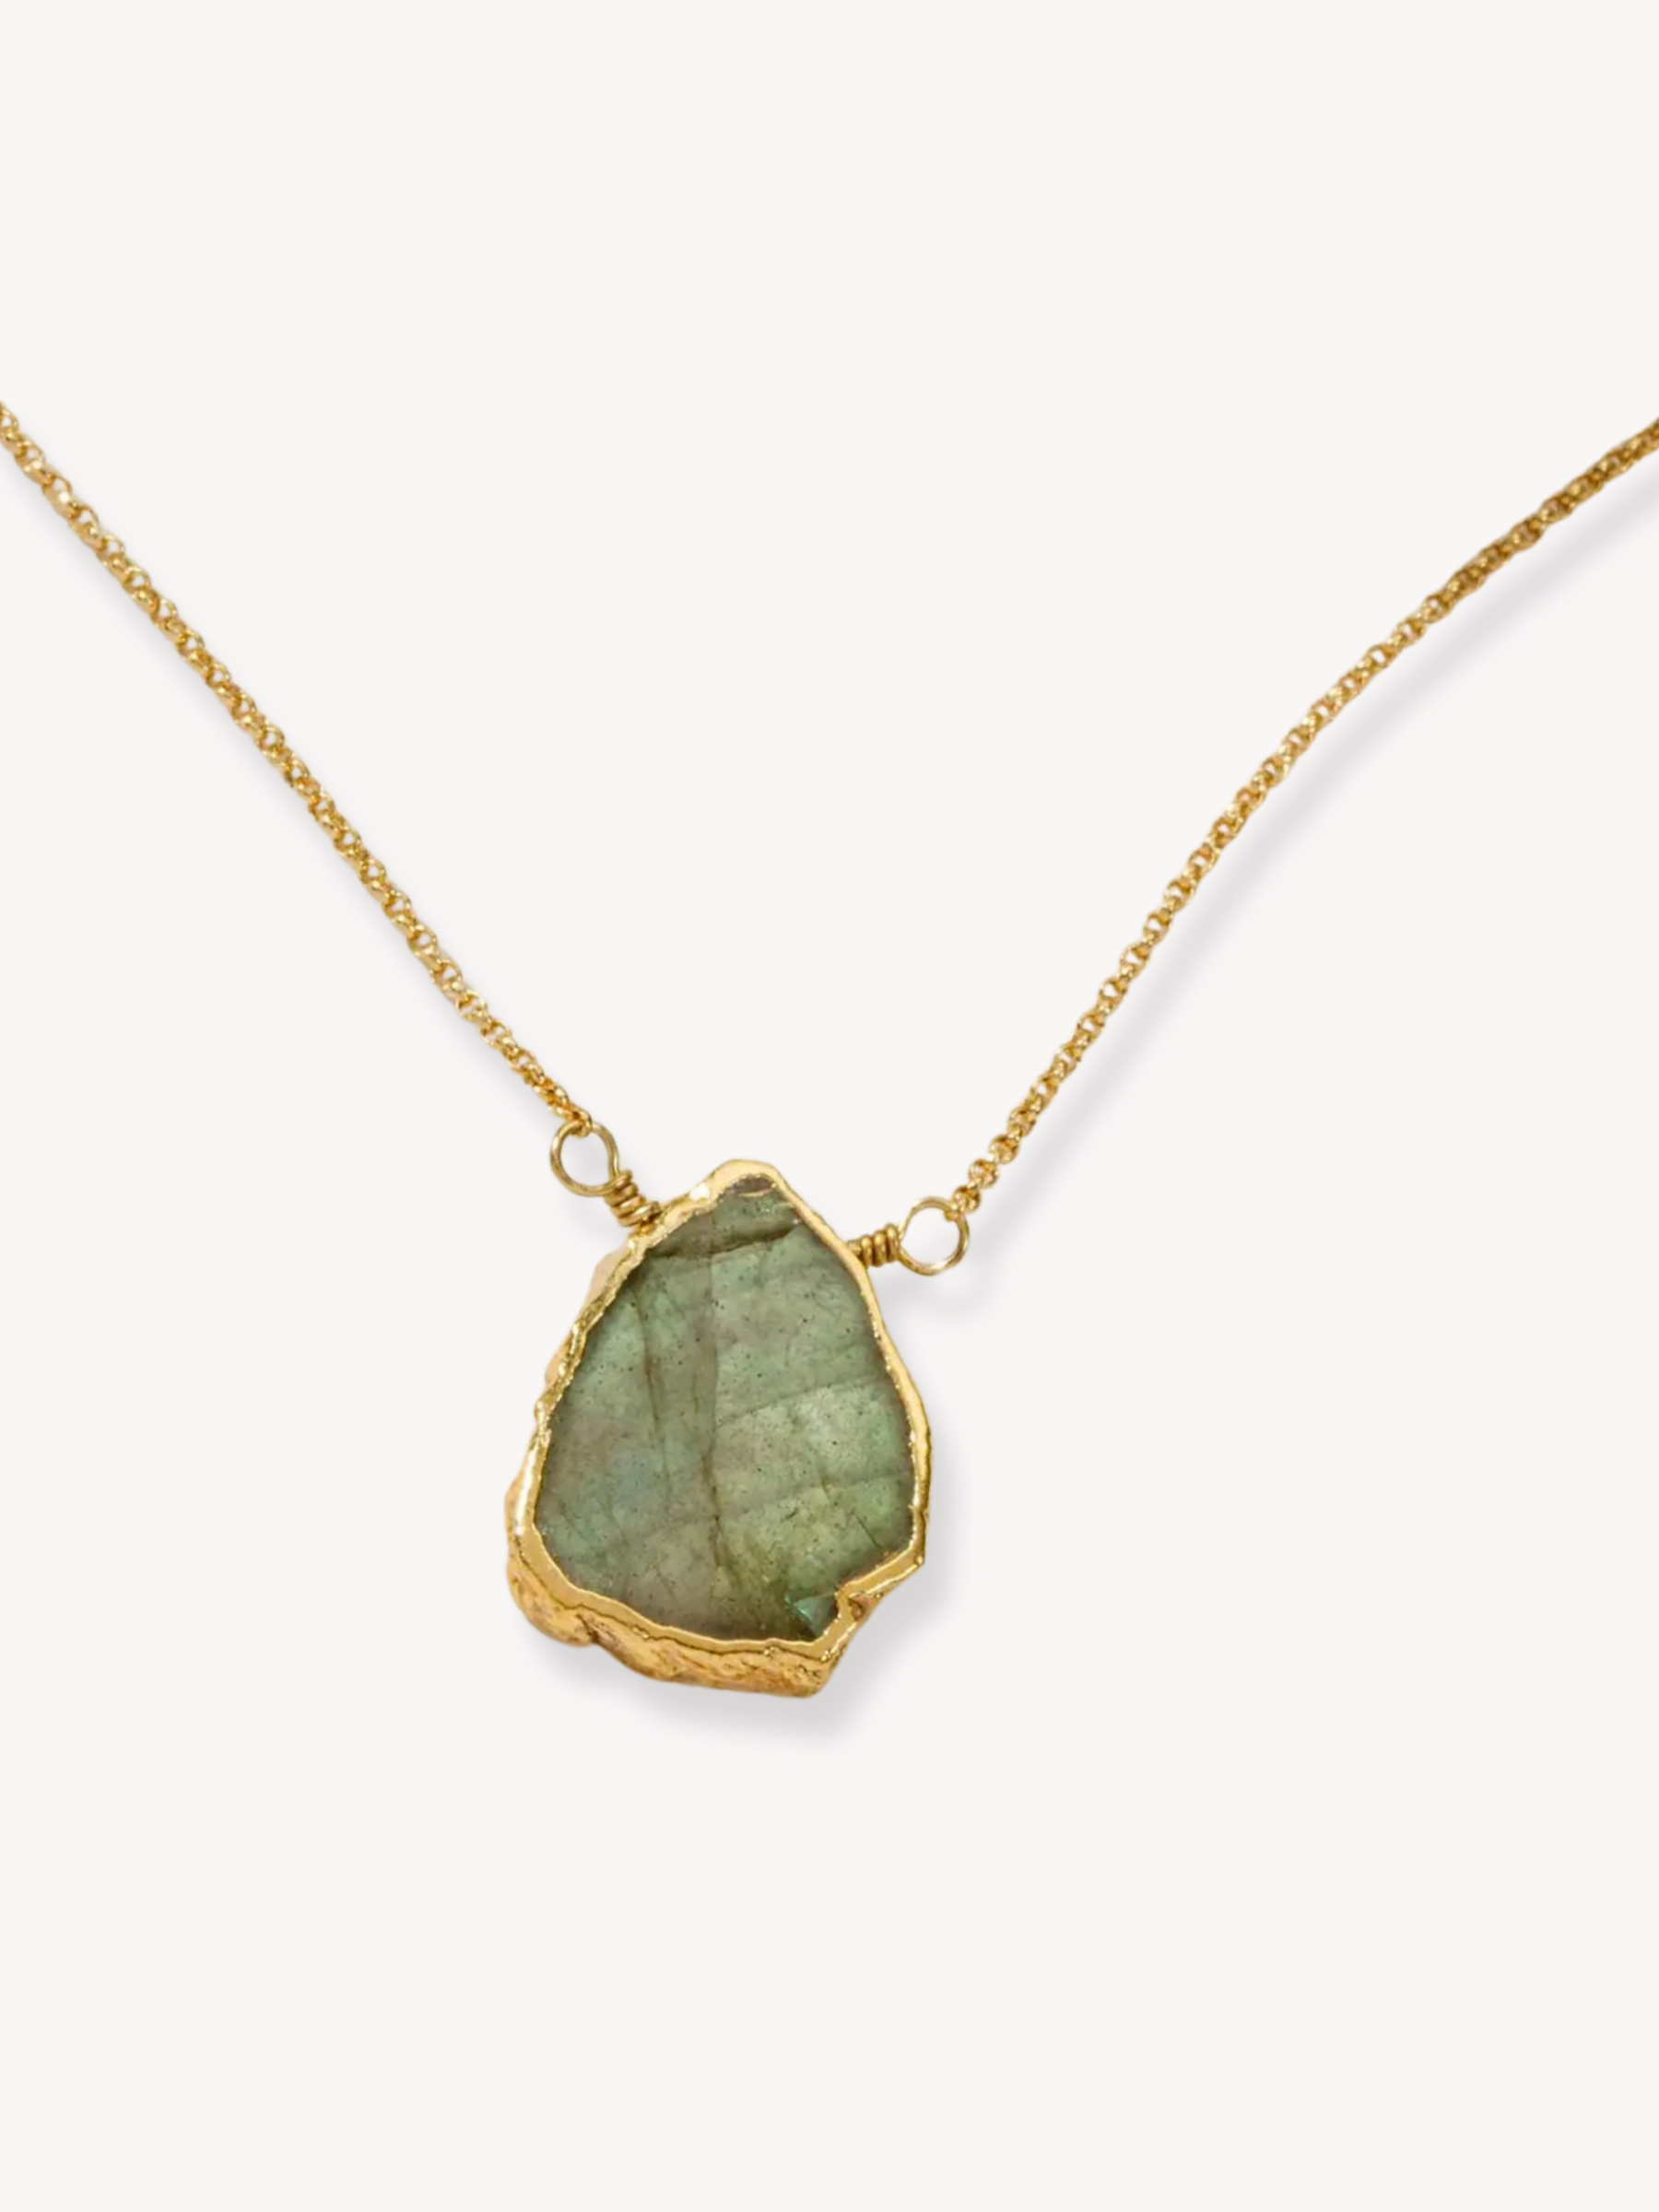 GOLDxTEAL Labradorite gold plated necklace.